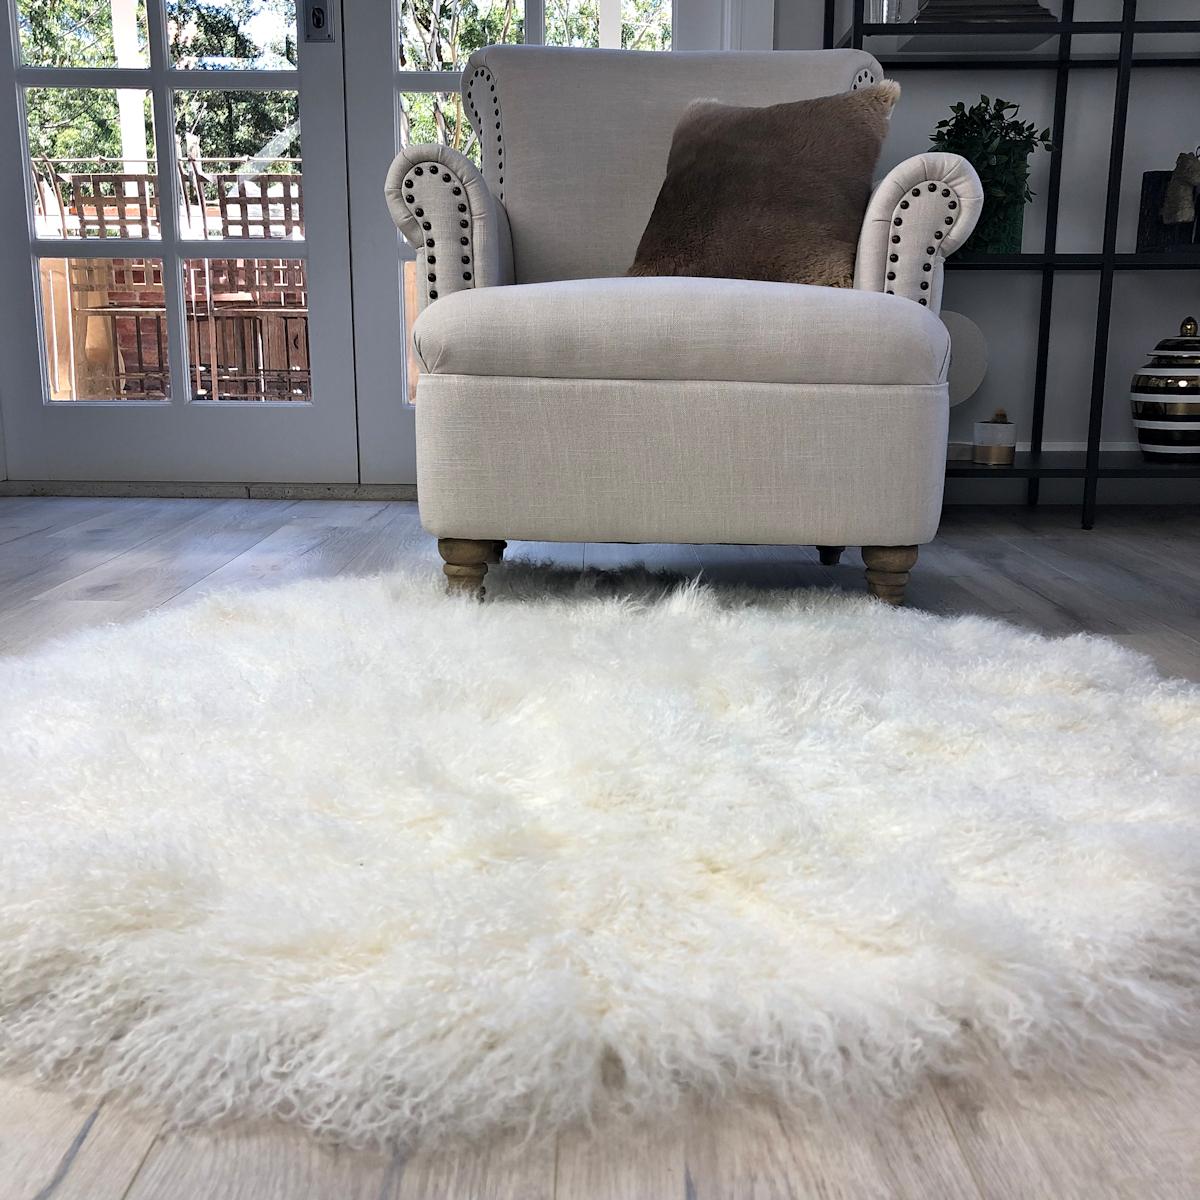 Style your interior floors with the beauty of a natural fur rug that looks and feels luxurious whilst adding the natural charm, elegance and character that genuine fur / wool has to offer. 
Meticulously handcrafted from genuine Mongolian